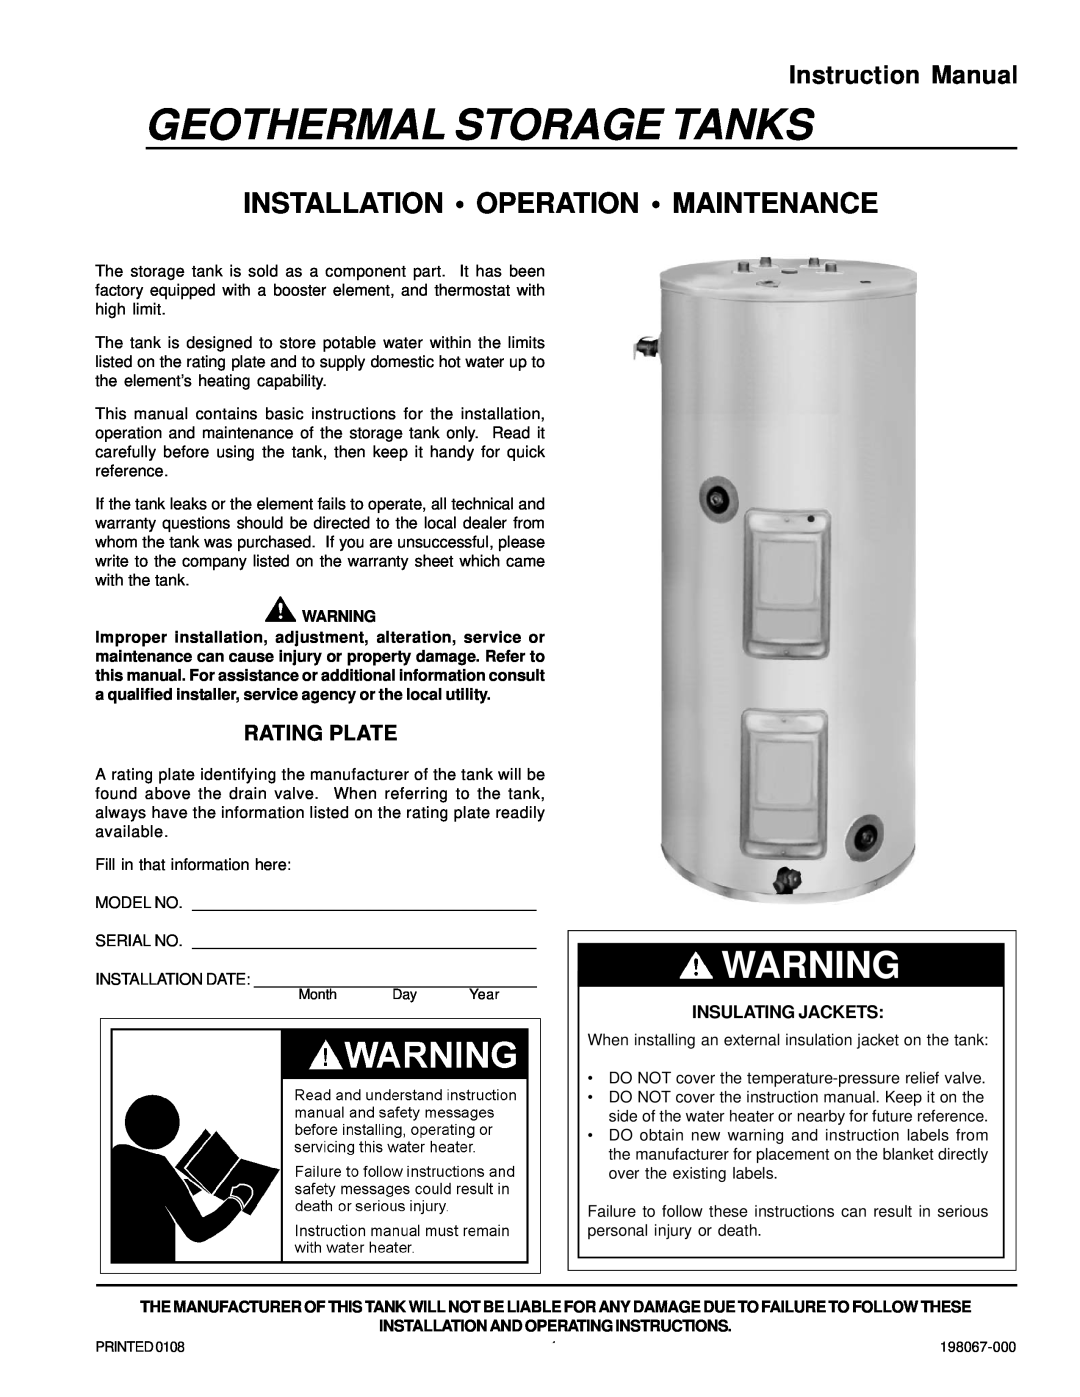 State Industries SGV 82 10TS instruction manual Rating Plate, Geothermal Storage Tanks, Installation Operation Maintenance 